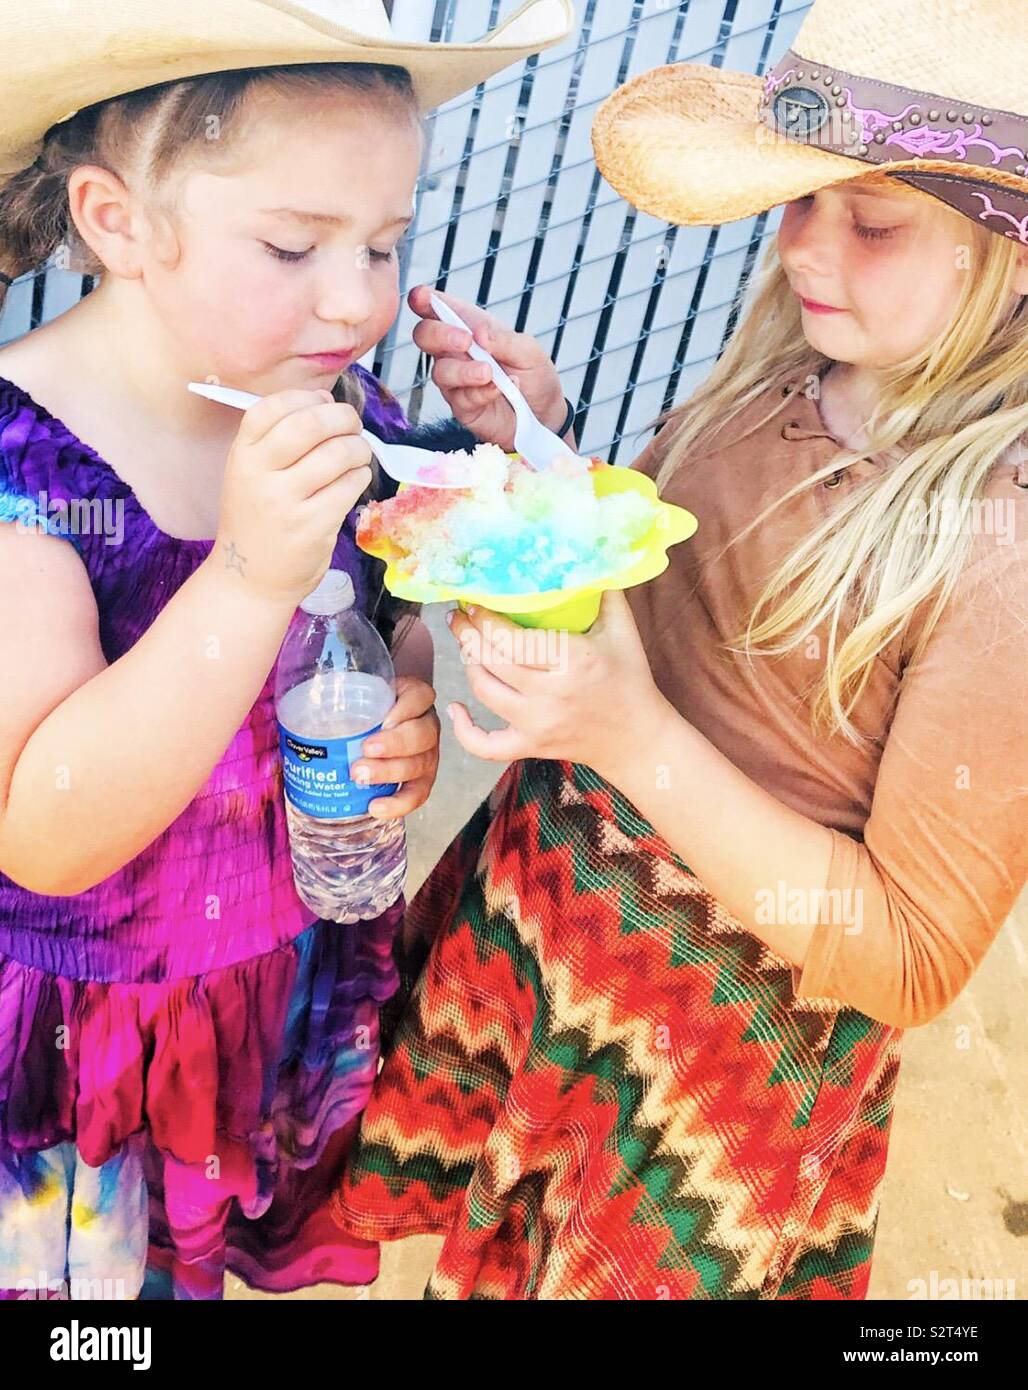 Two young girls wearing cowboy hats at the rodeo, sharing a huge snow cone wearing bright dresses Stock Photo